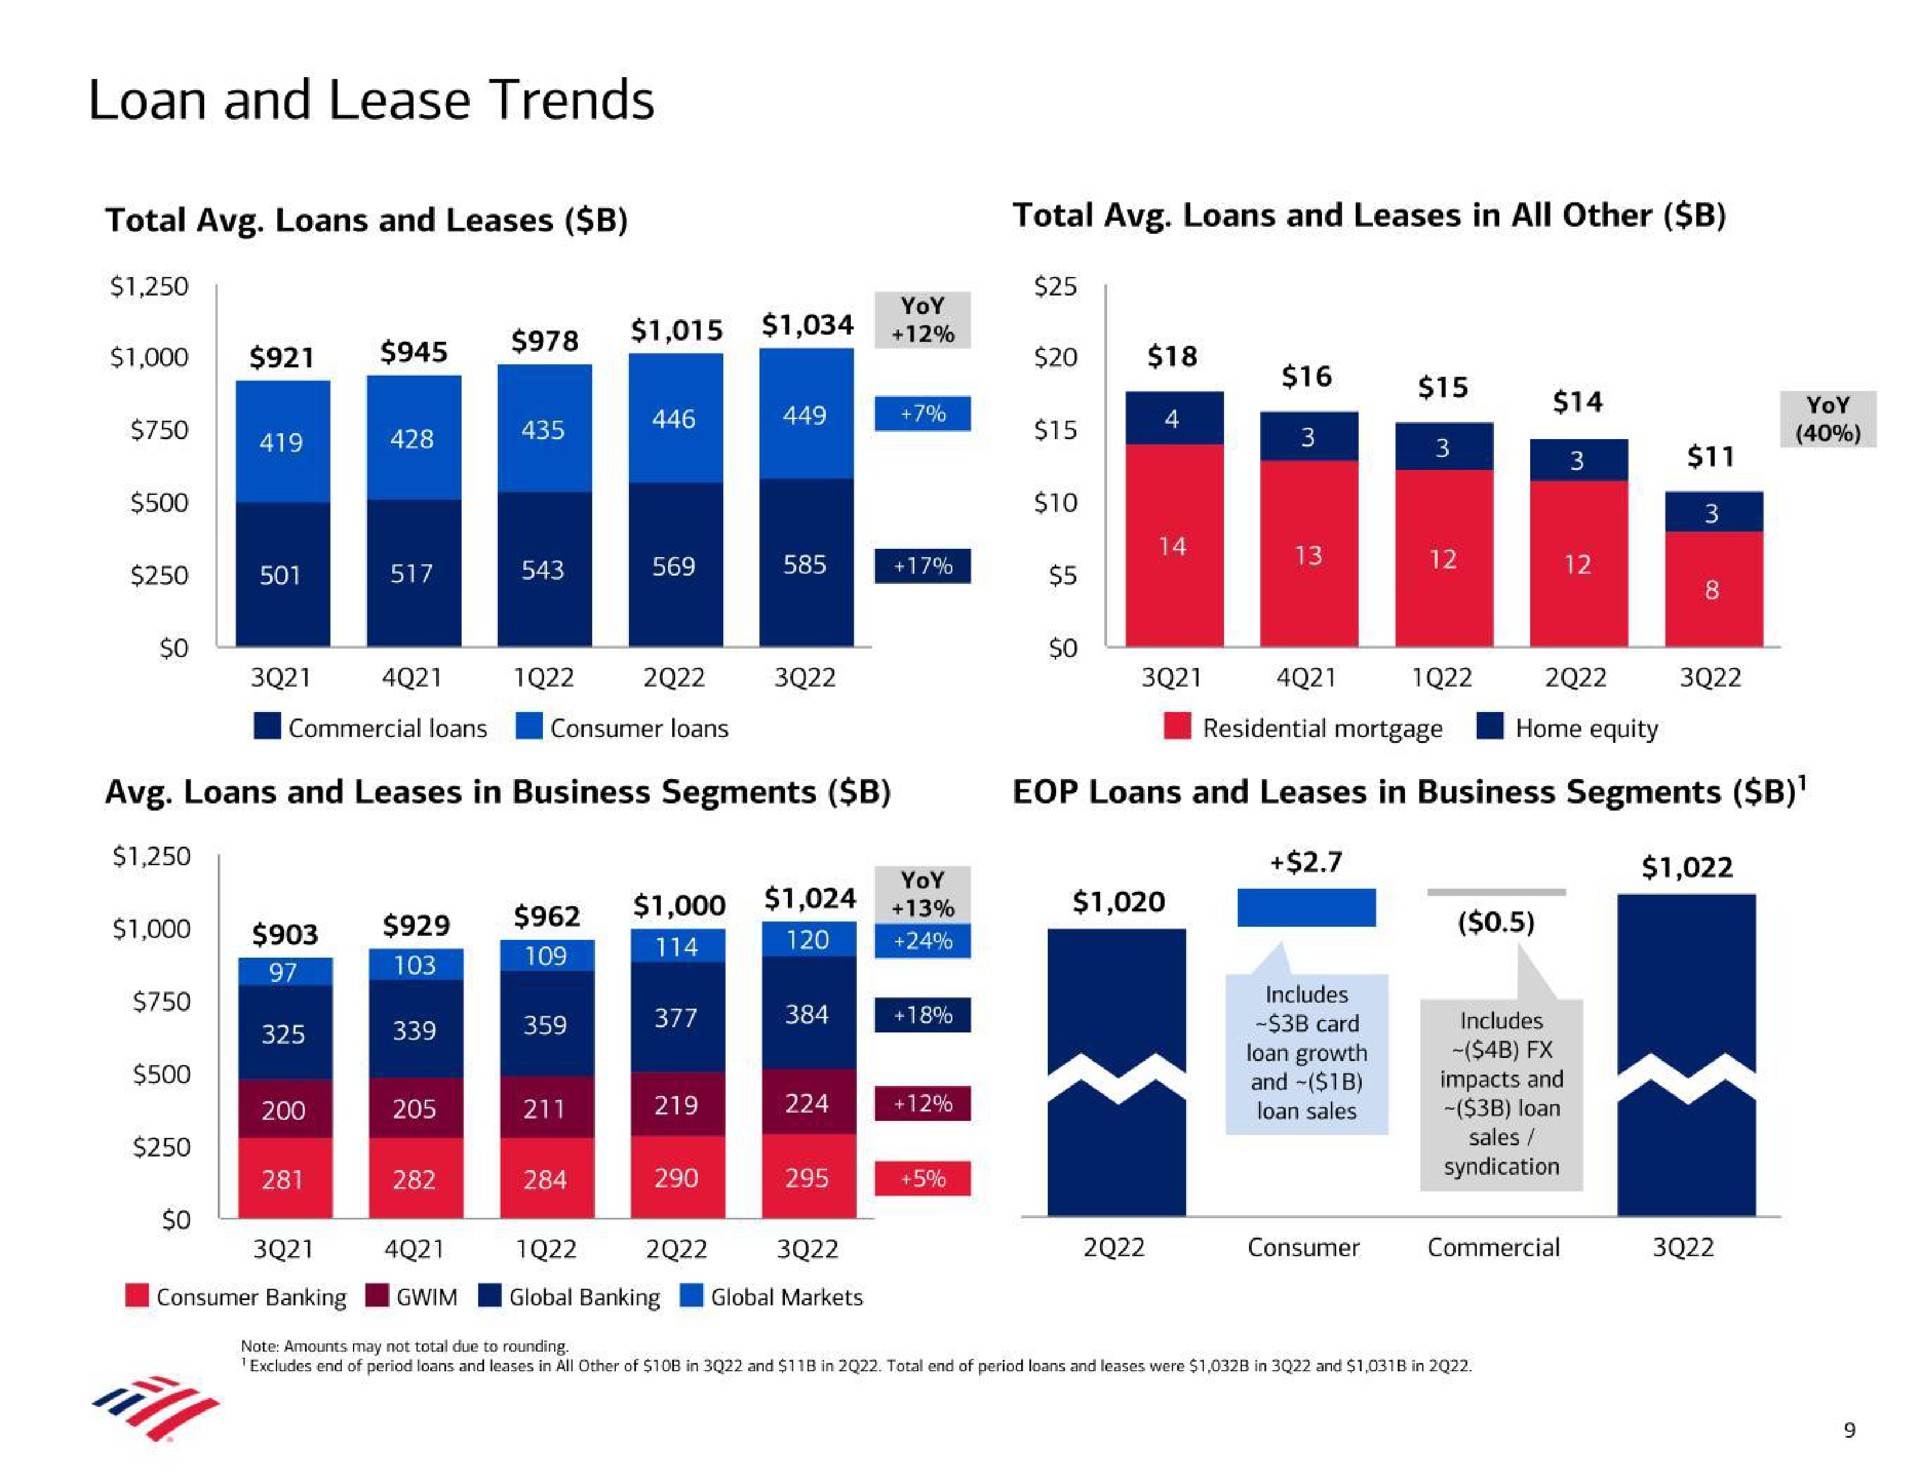 loan and lease trends total loans and leases total loans and leases in all other leas ret commercial loans consumer loans loans and leases in business segments loans and leases in business segments as | Bank of America